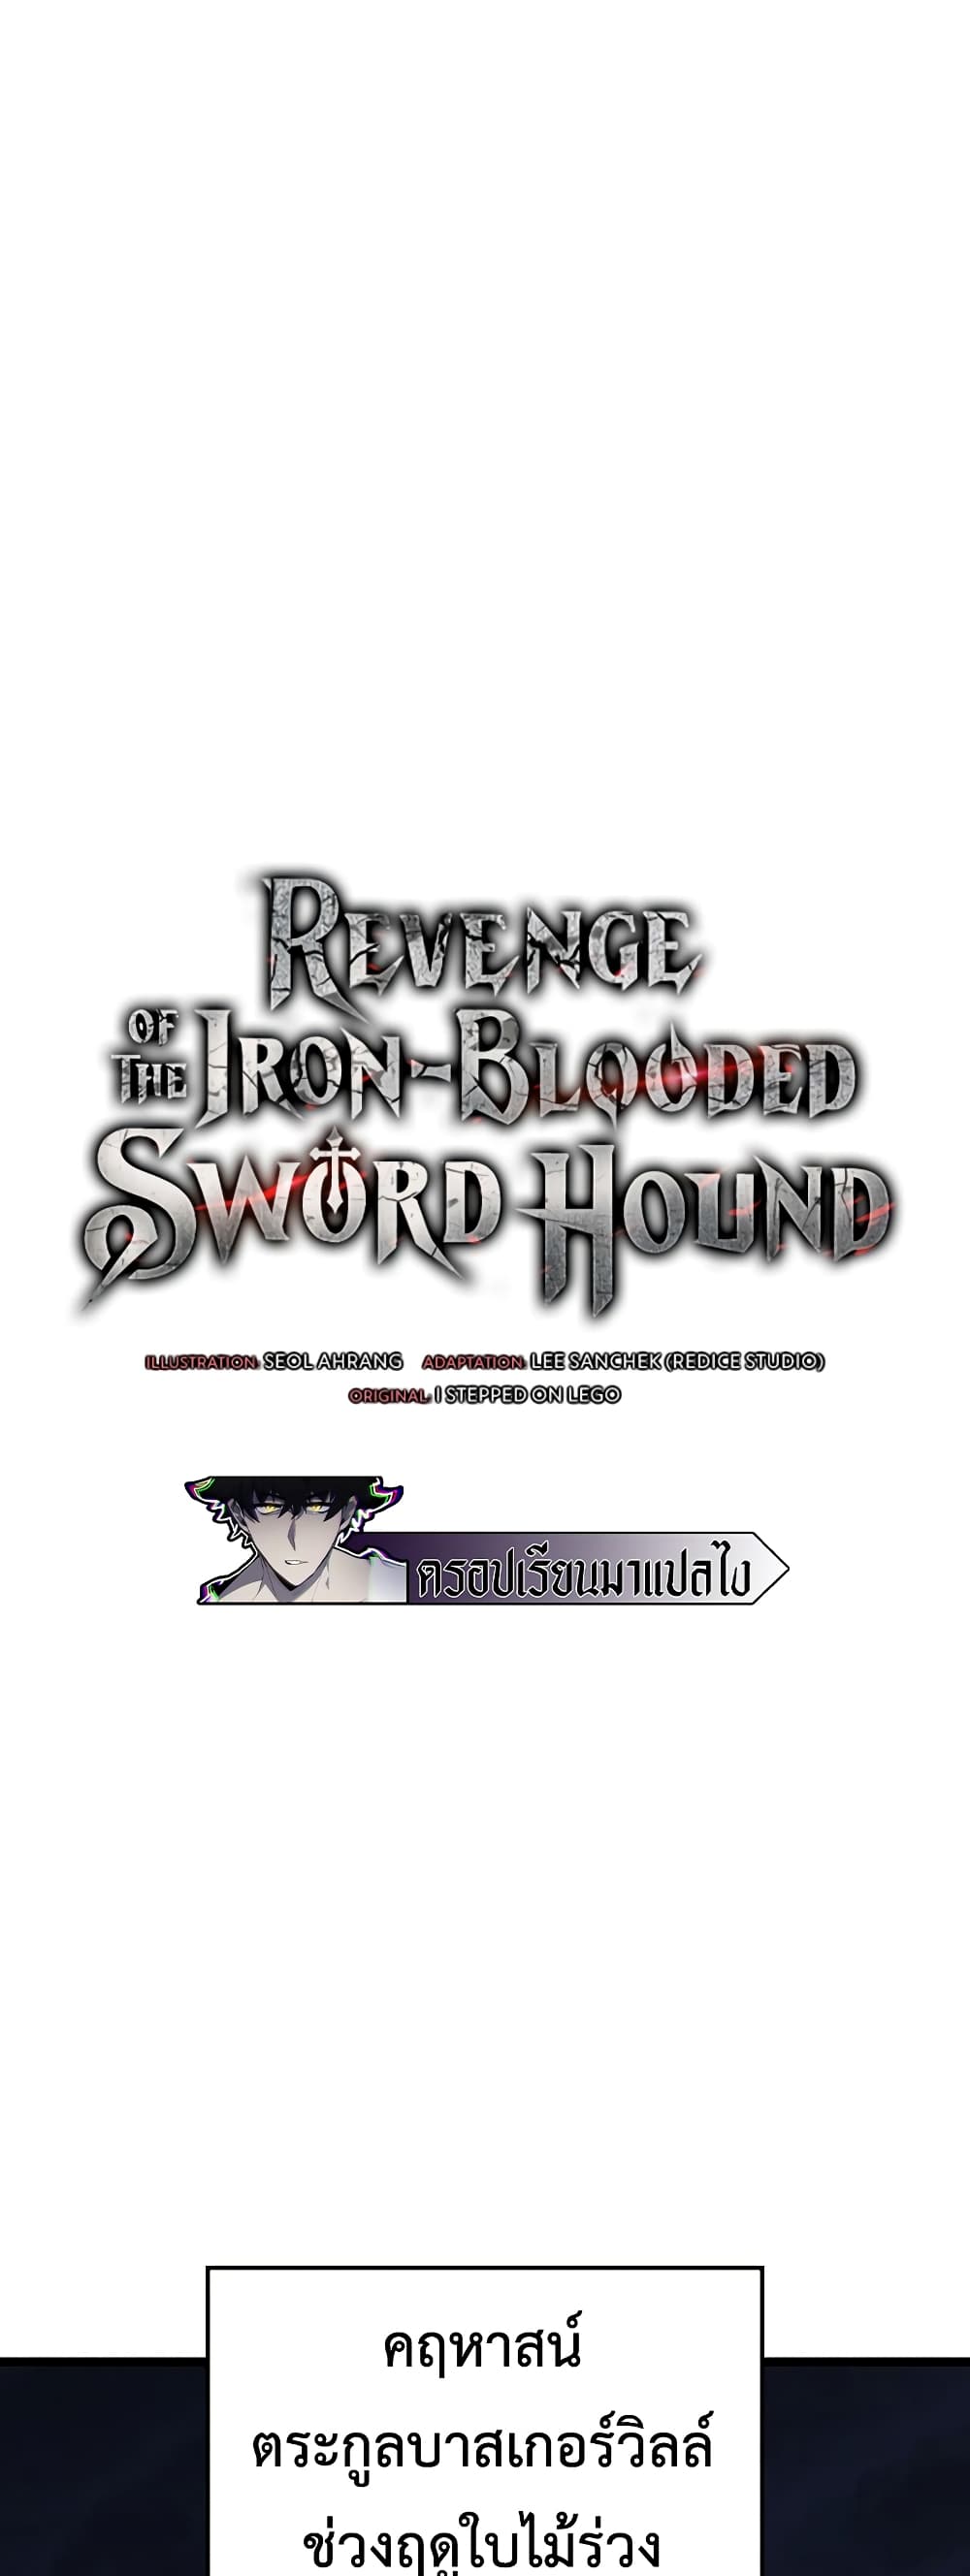 Revenge of the Iron-Blooded Sword Hound 1-1